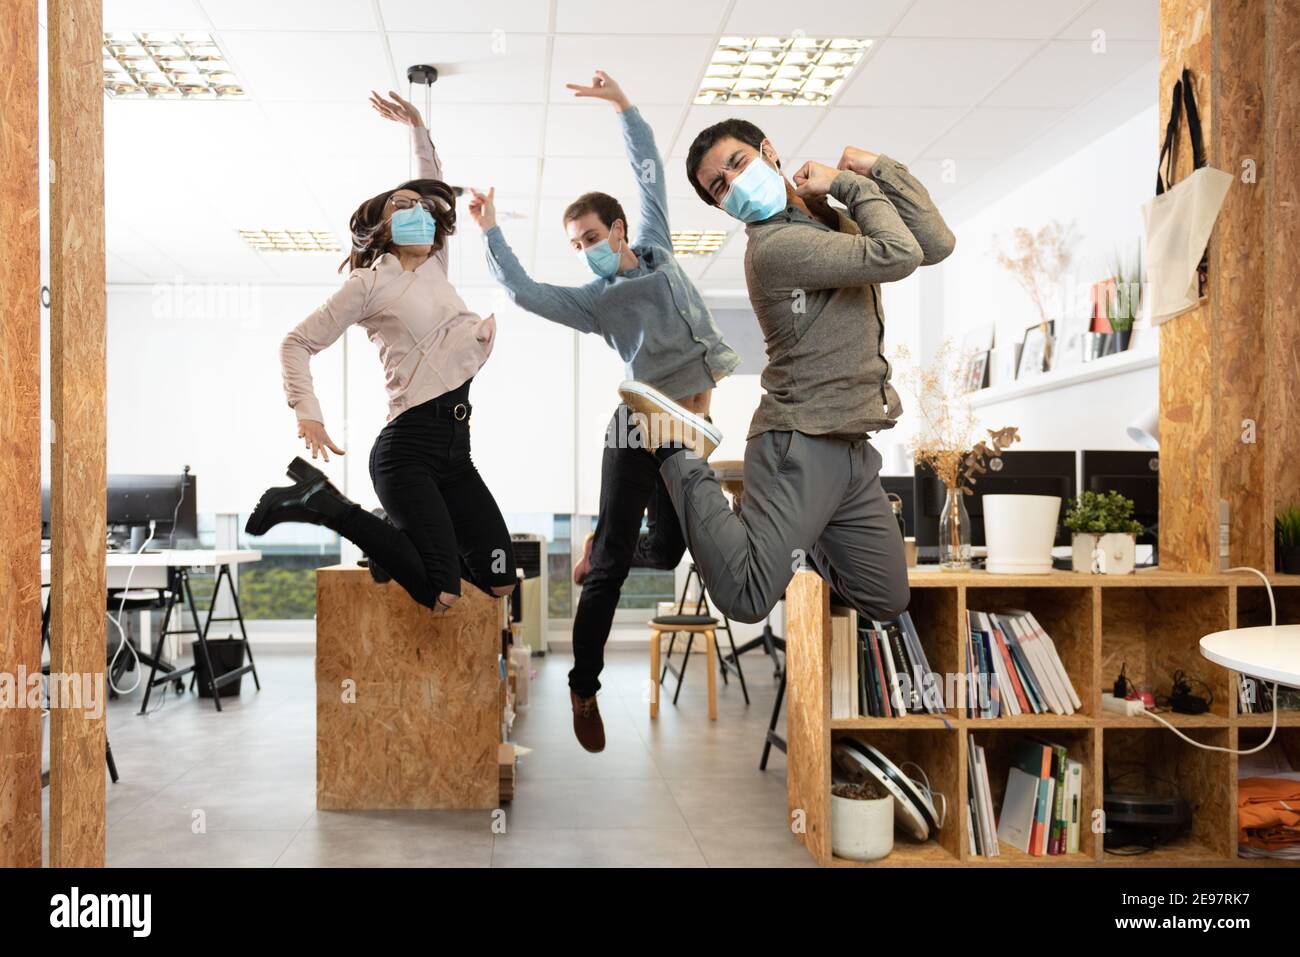 Happy coworkers wearing protective masks jumping and celebrating at the workplace. Working in the office during Coronavirus pandemic concept. Stock Photo